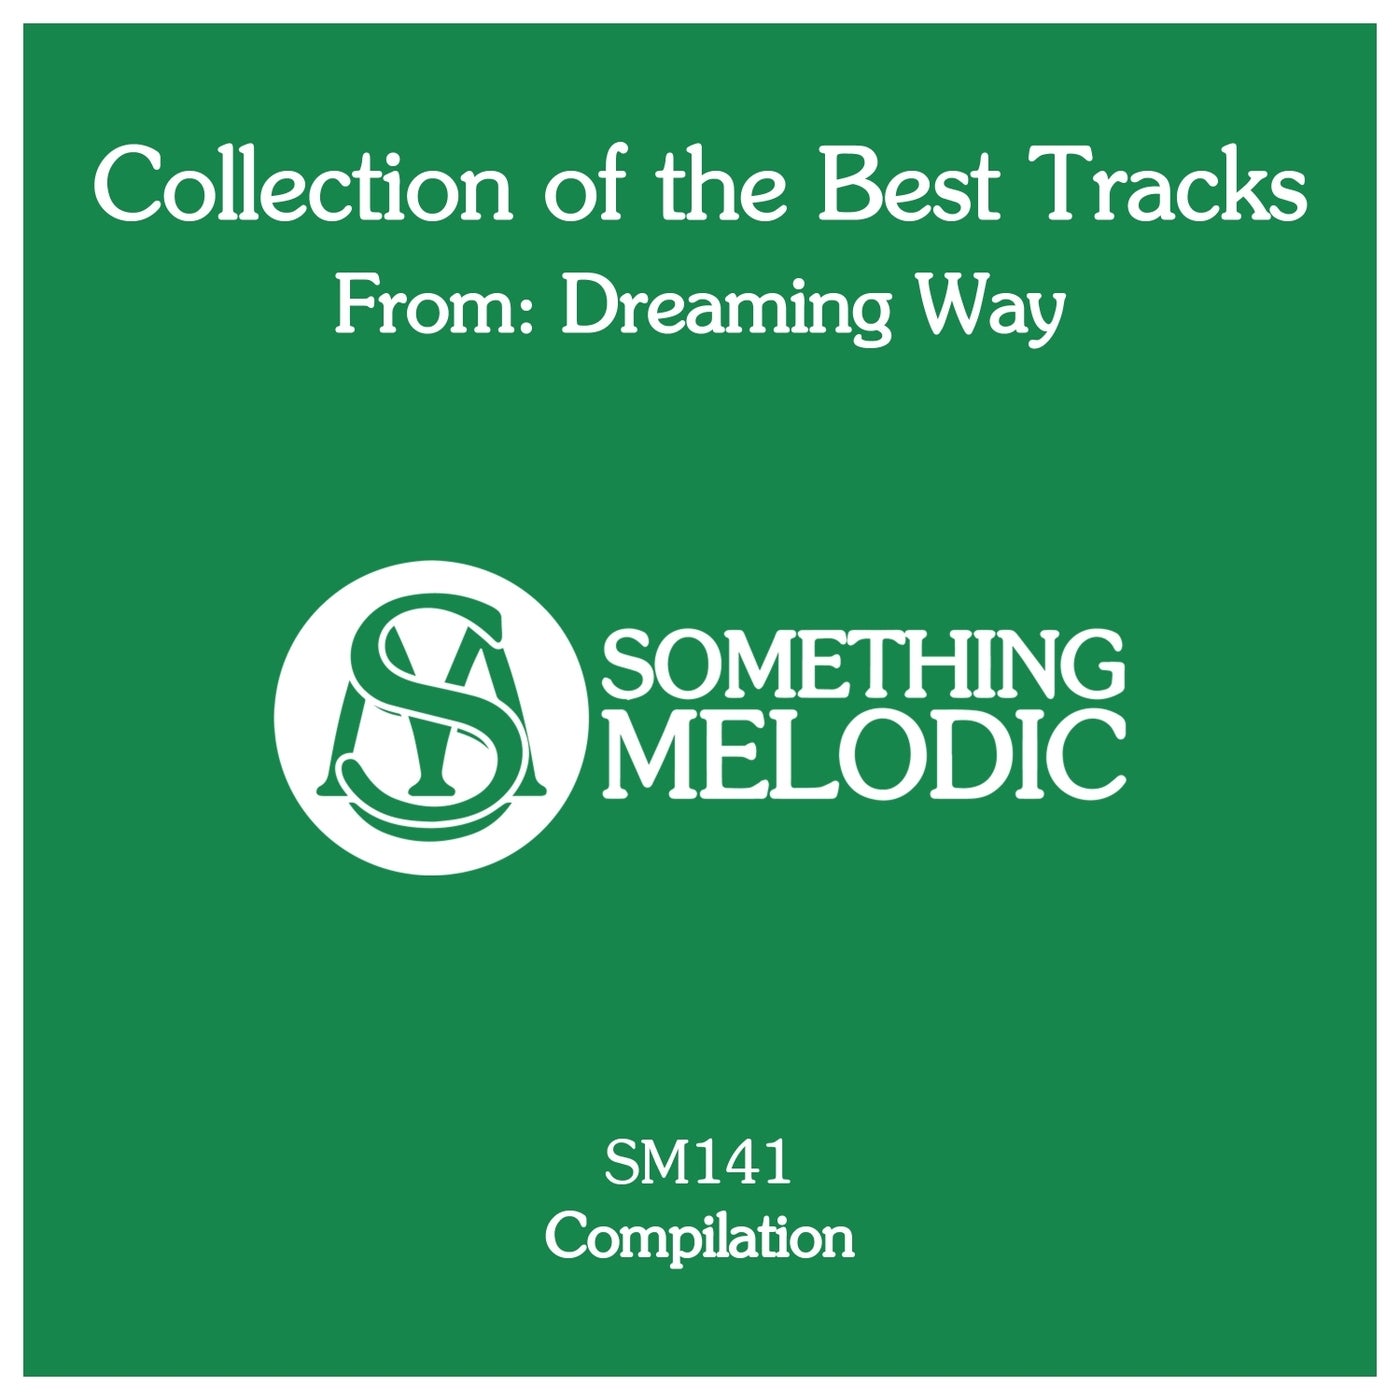 Collection of the Best Tracks From: Dreaming Way